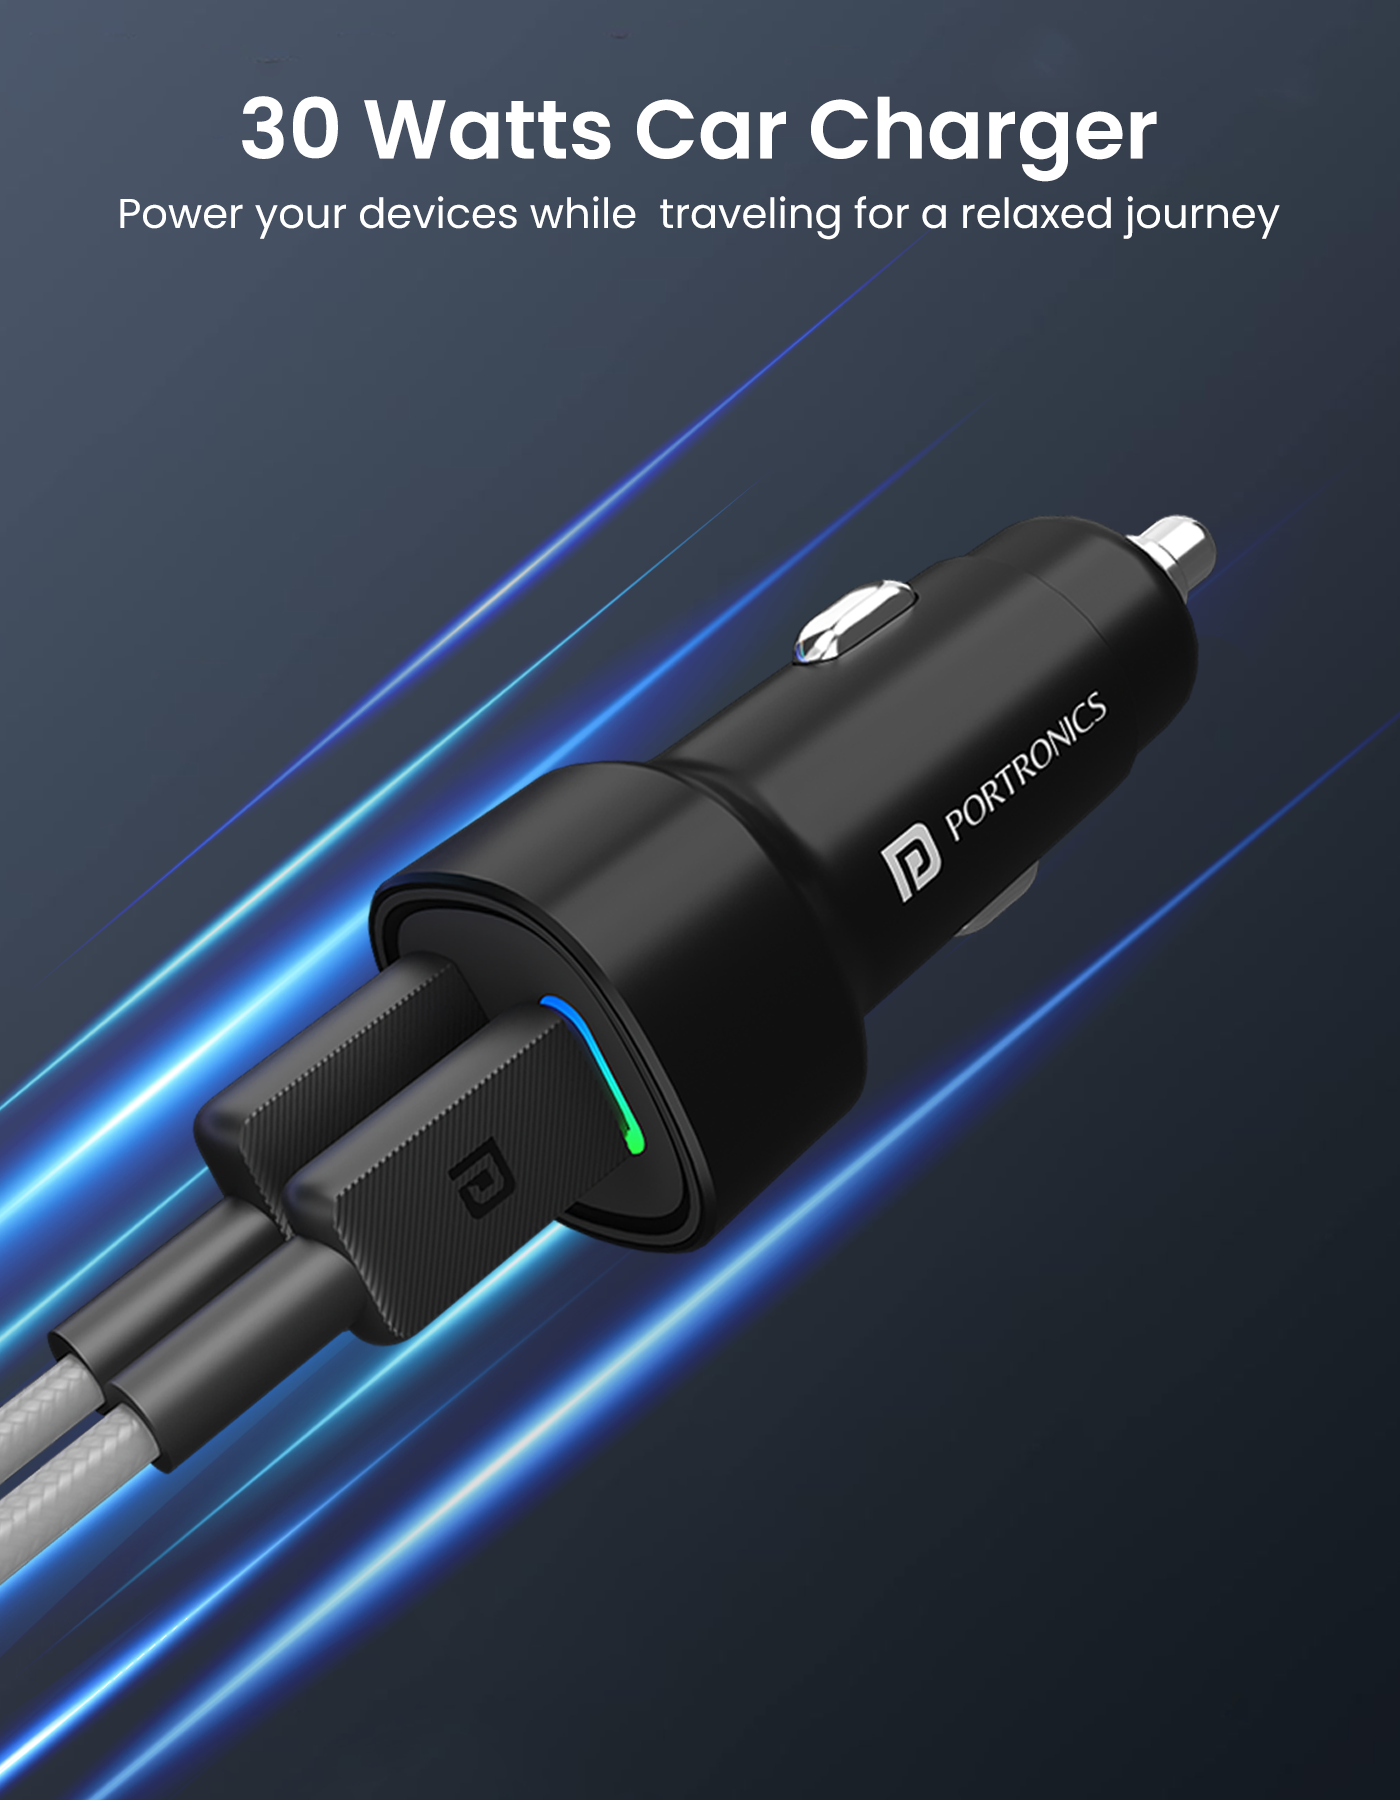 51W power output from portronics car power 18 car charger